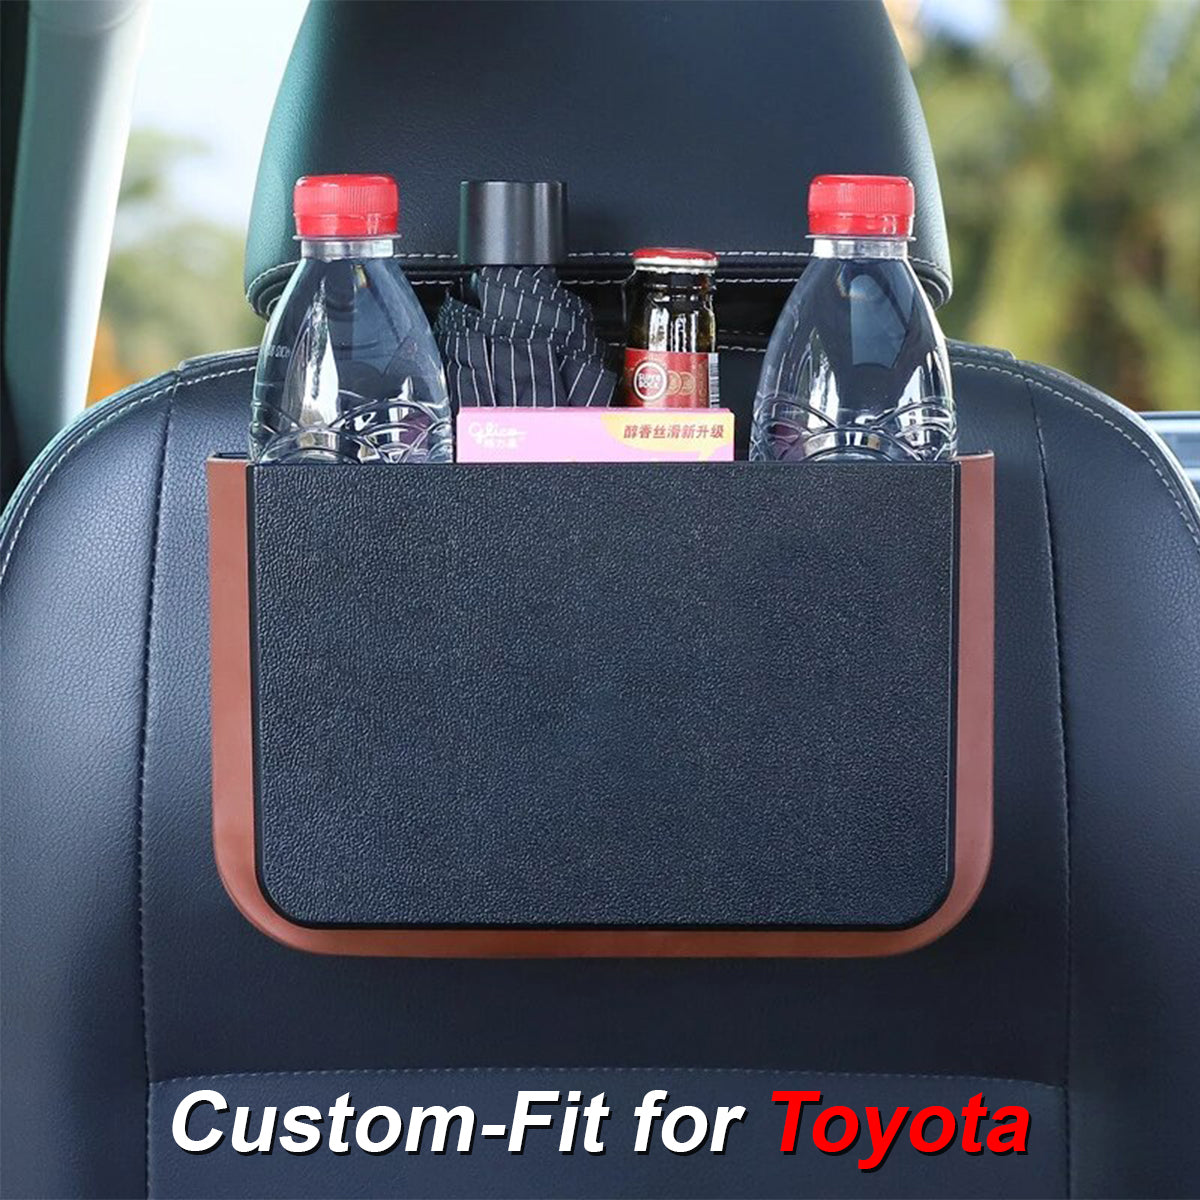 Hanging Waterproof Car Trash can-Foldable, Custom-Fit For Car, Waterproof, Equipped with Cup Holders and Trays DLPF251